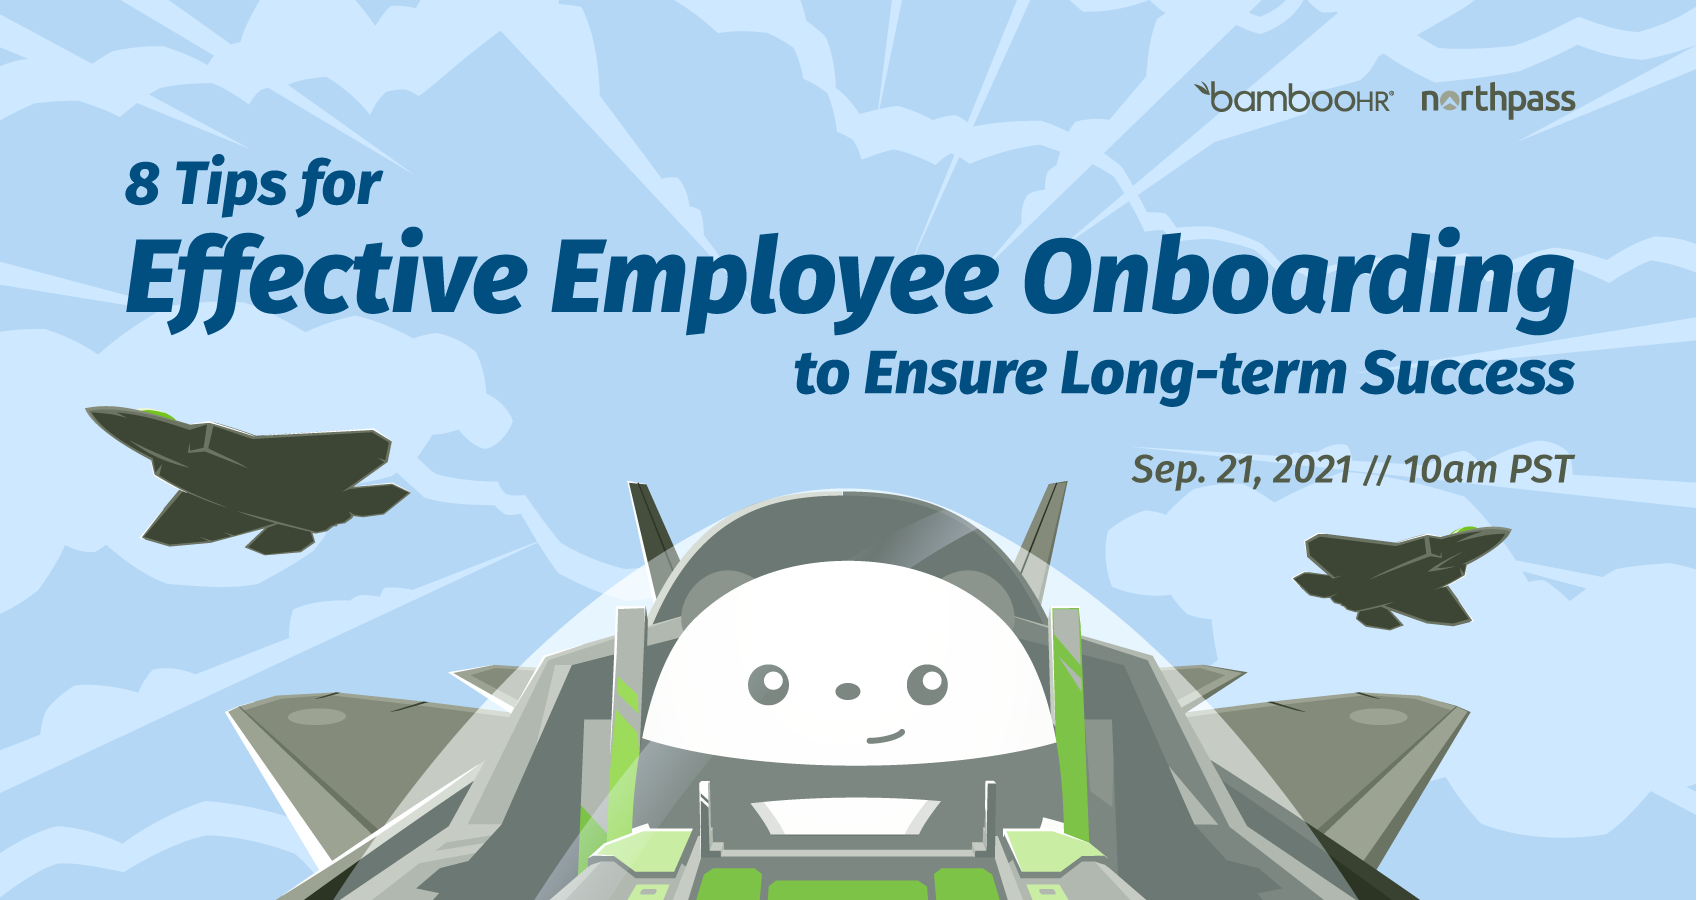 8 Tips for Effective Employee Onboarding to Ensure Long-term Success